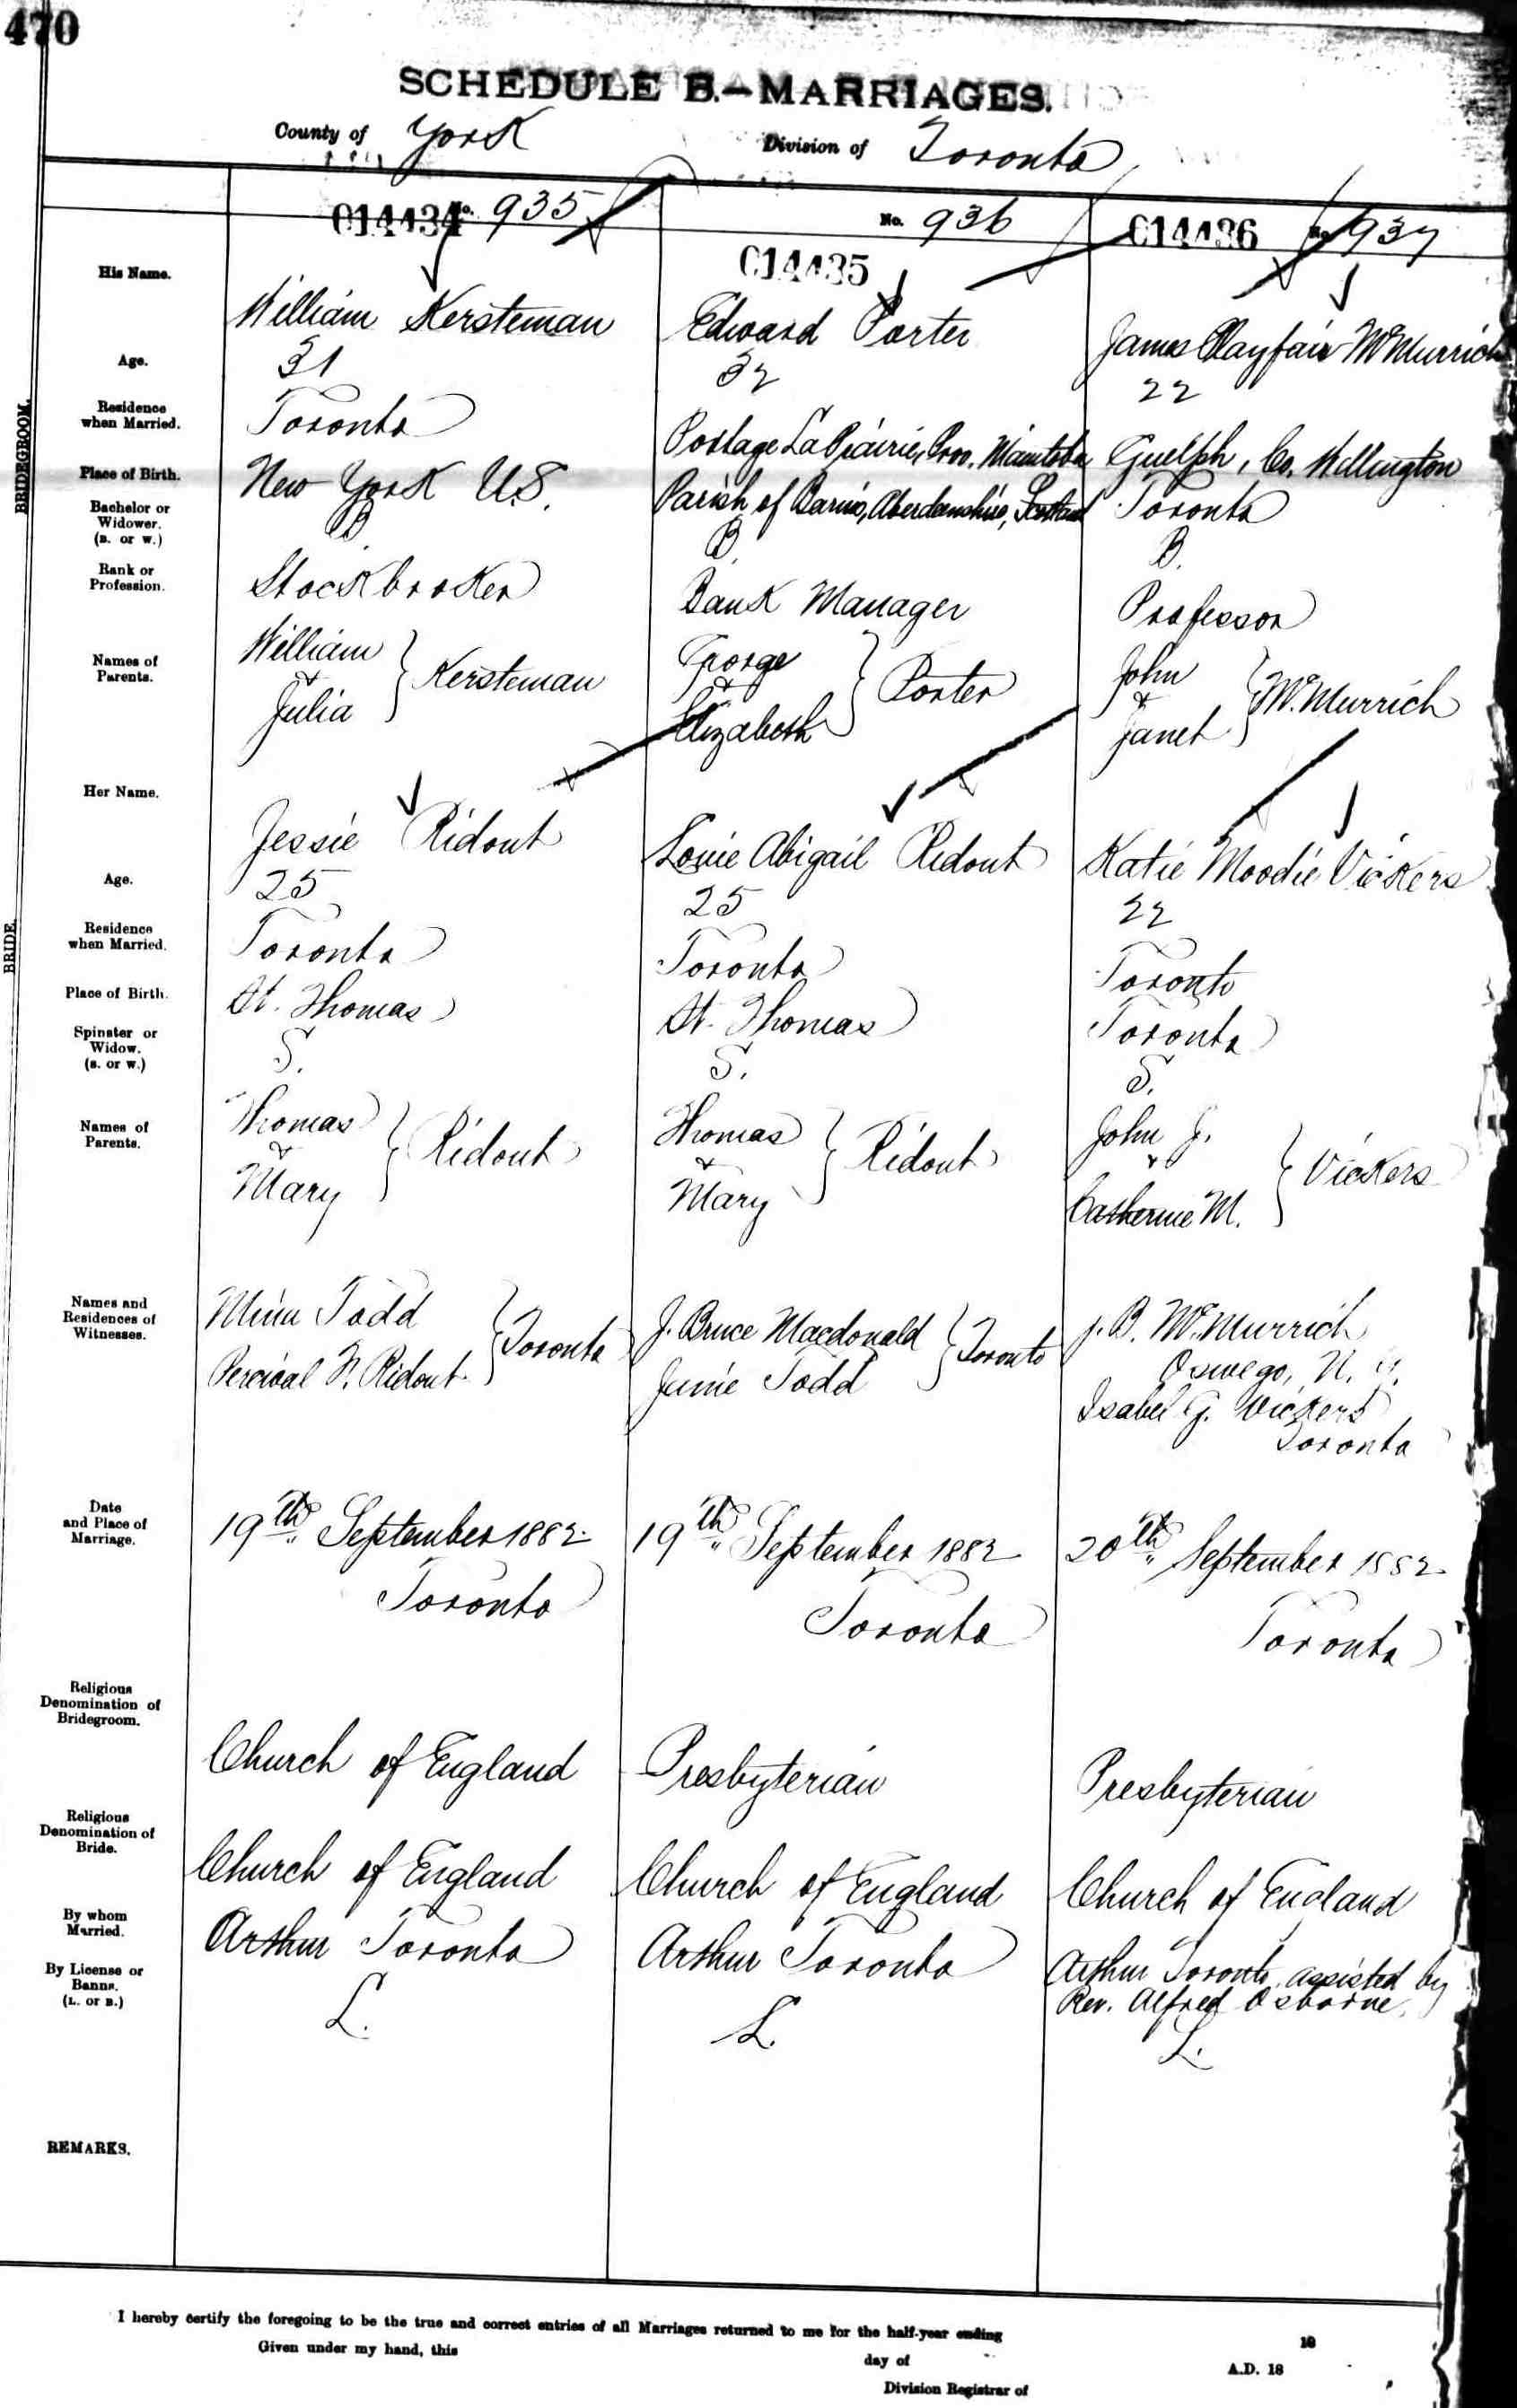 marriage record - james mcmurrich + katie vickers 1882.jpg